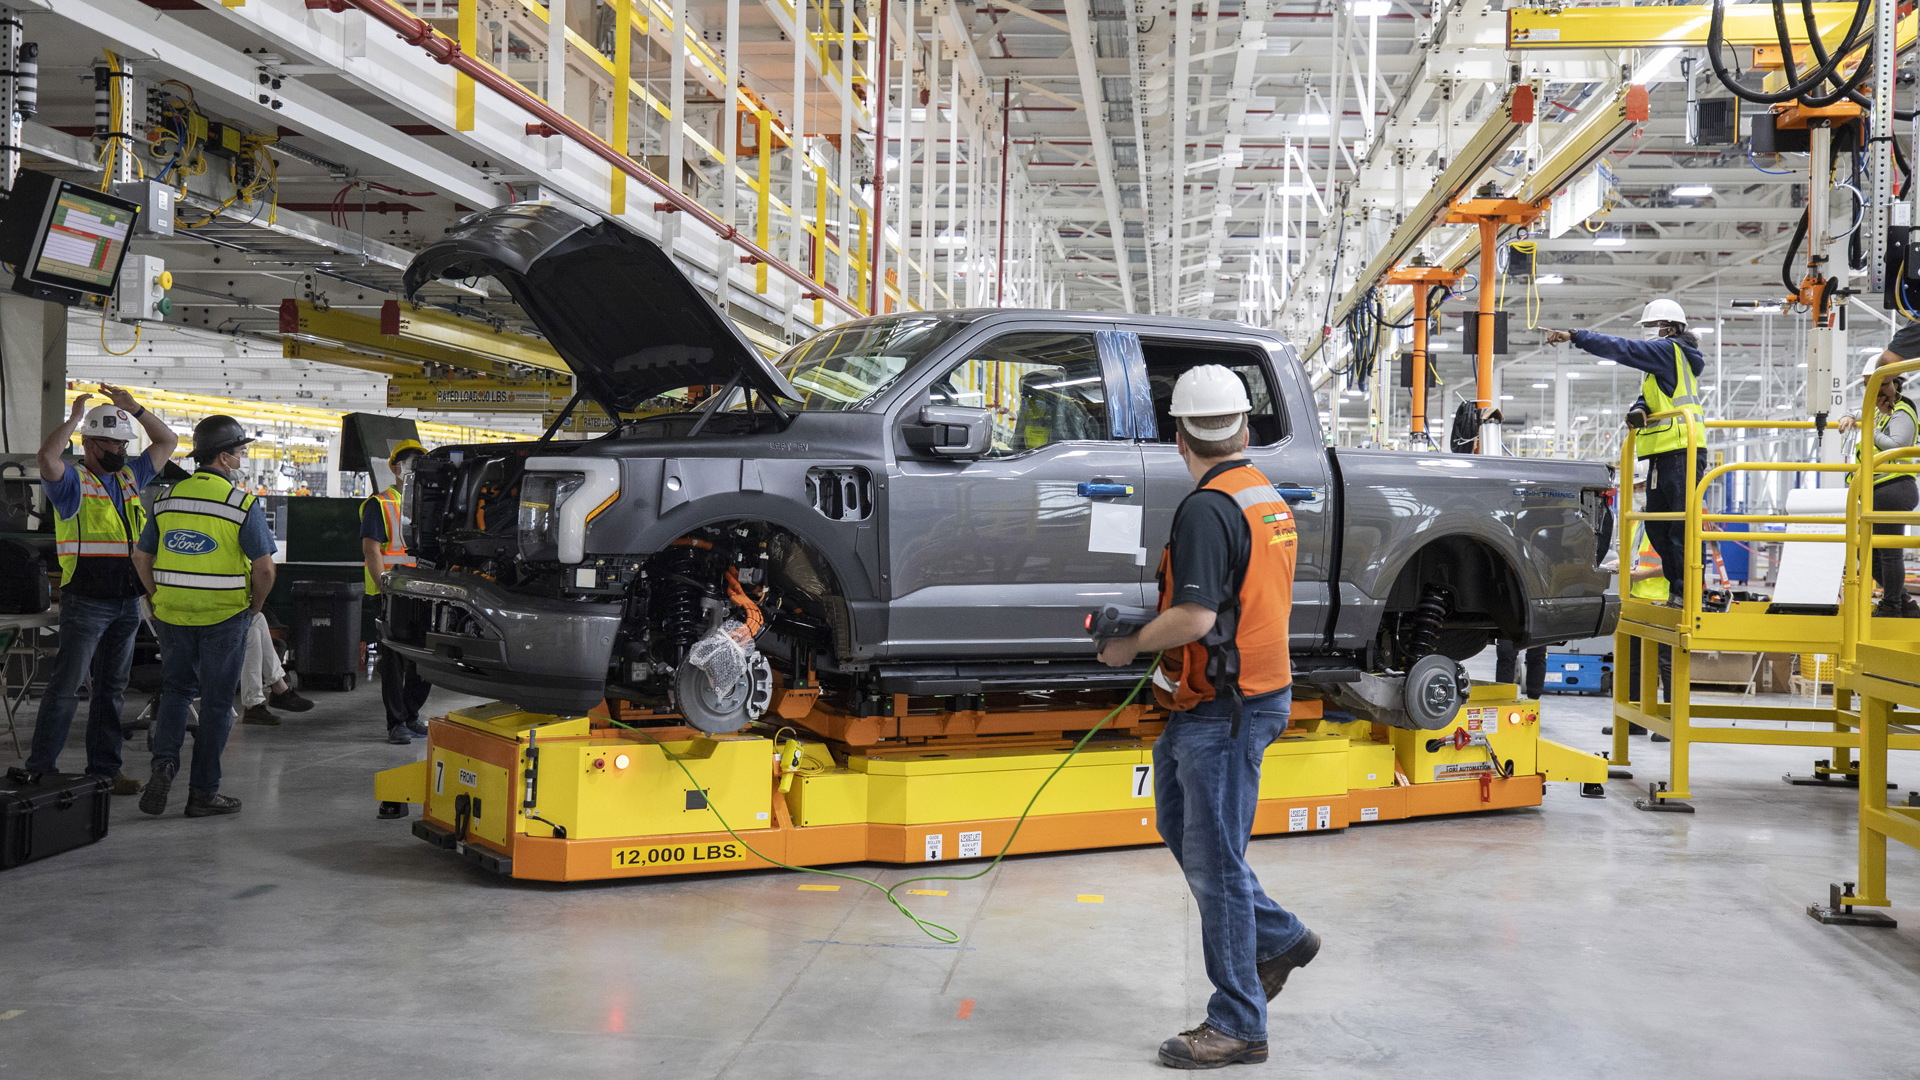 2022 Ford F-150 Lightning pre-production